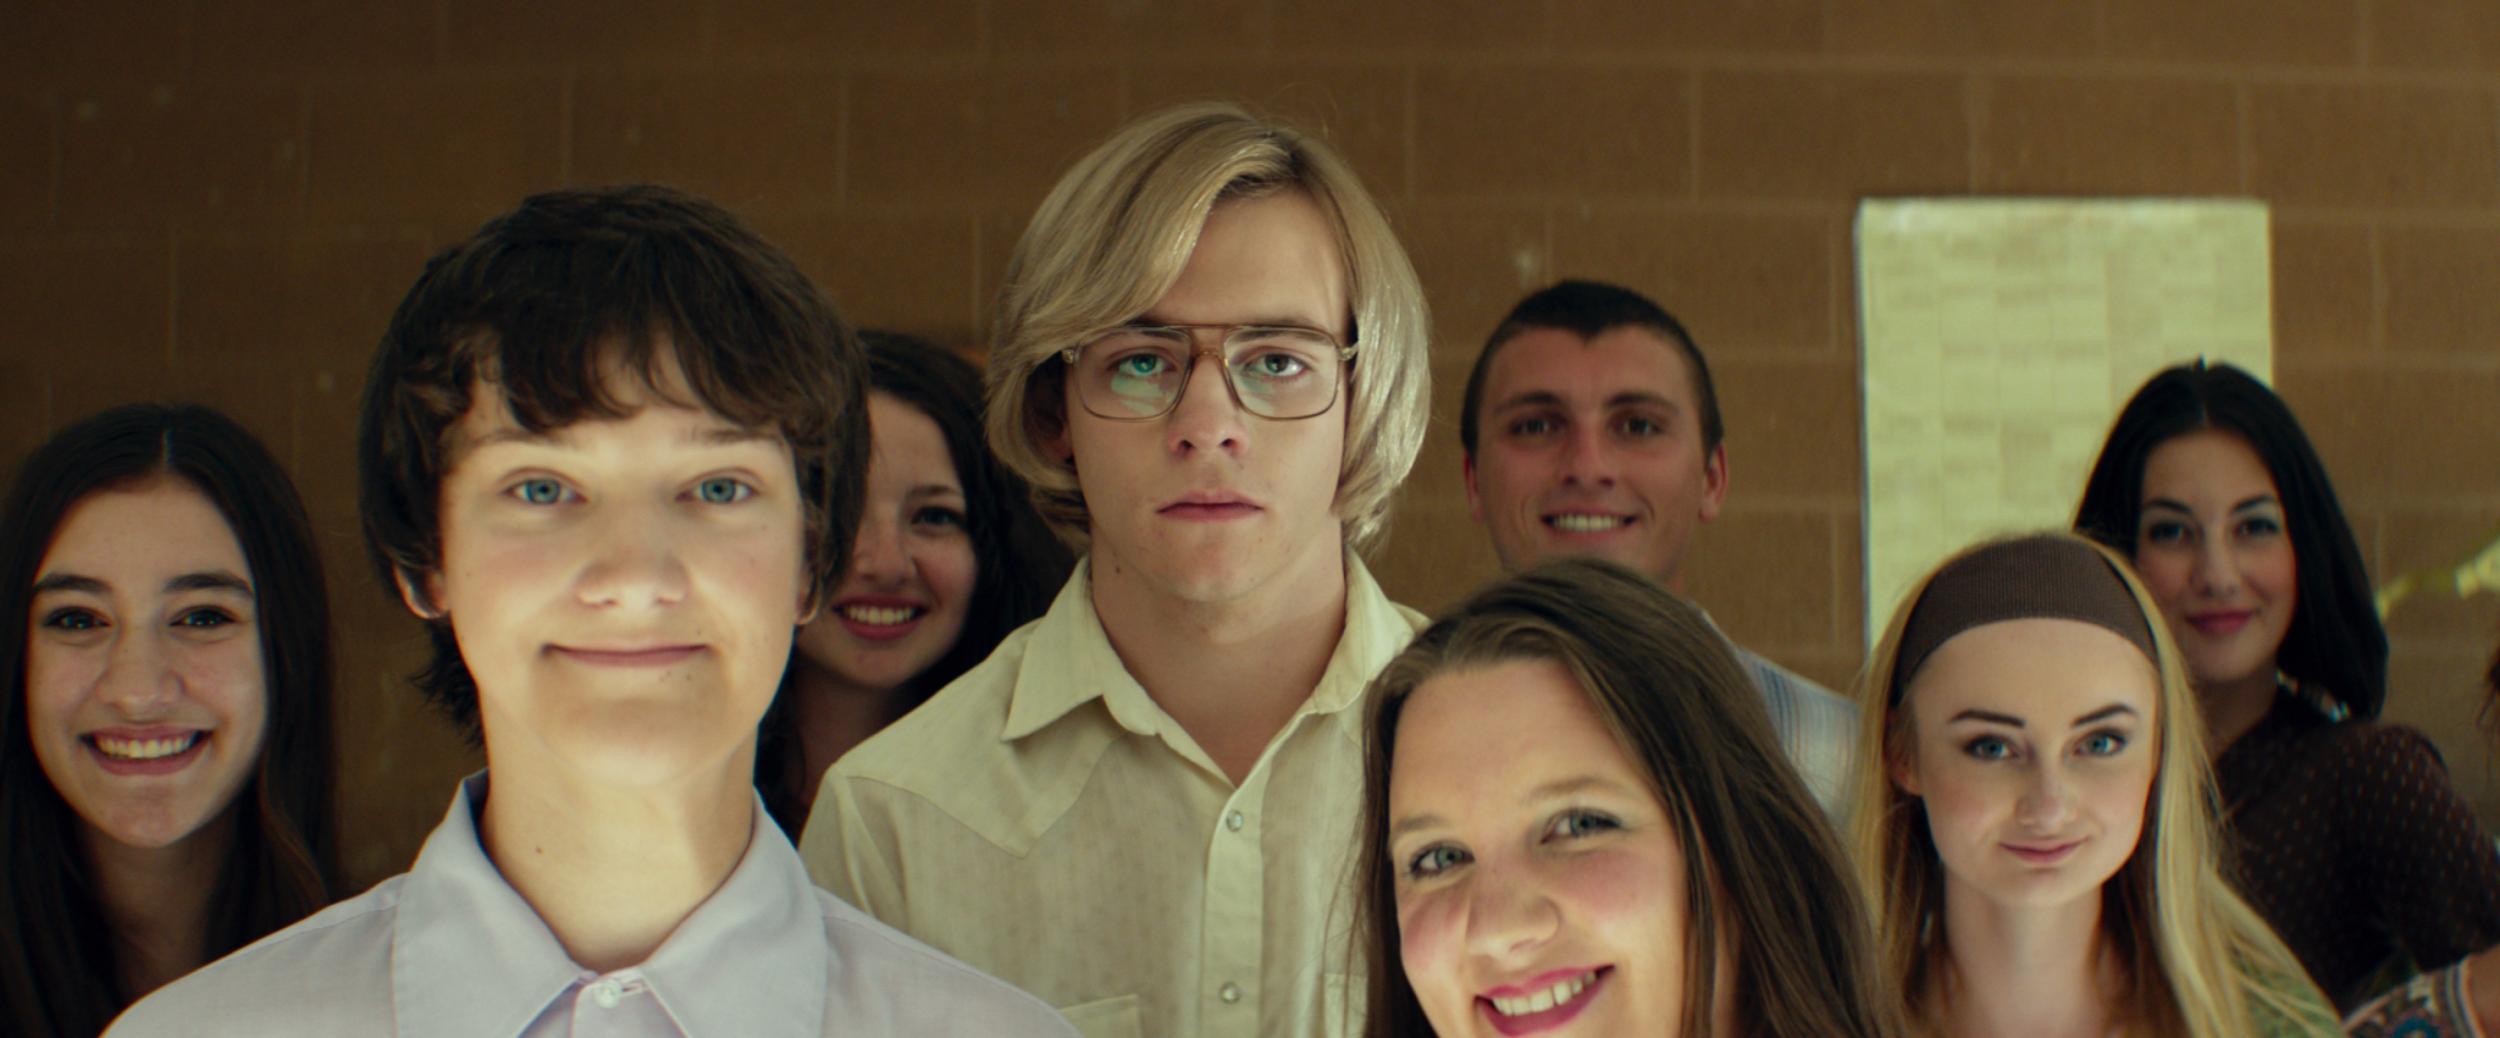 Ross Lynch (centre) plays the notorious American serial killer in ‘My Friend Dahmer’